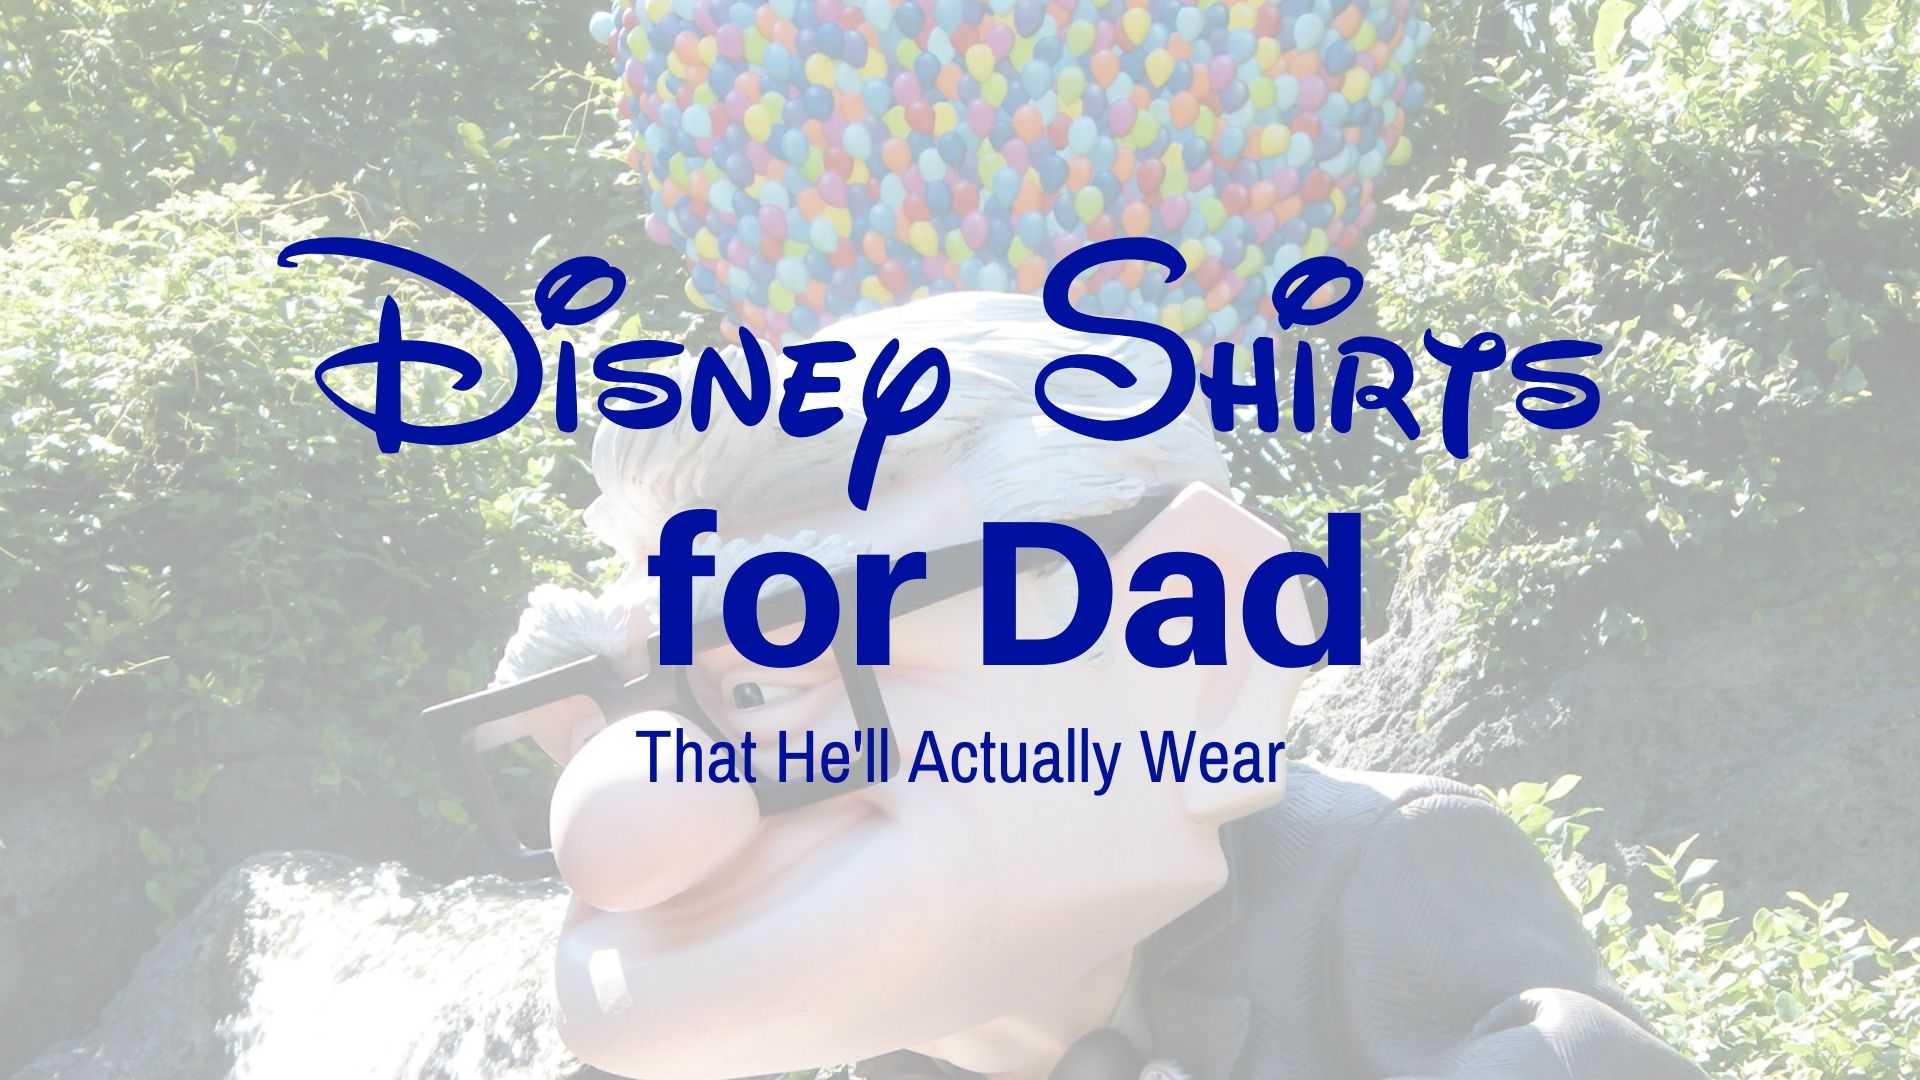 Disney Shirts for Dad that he'll actually wear